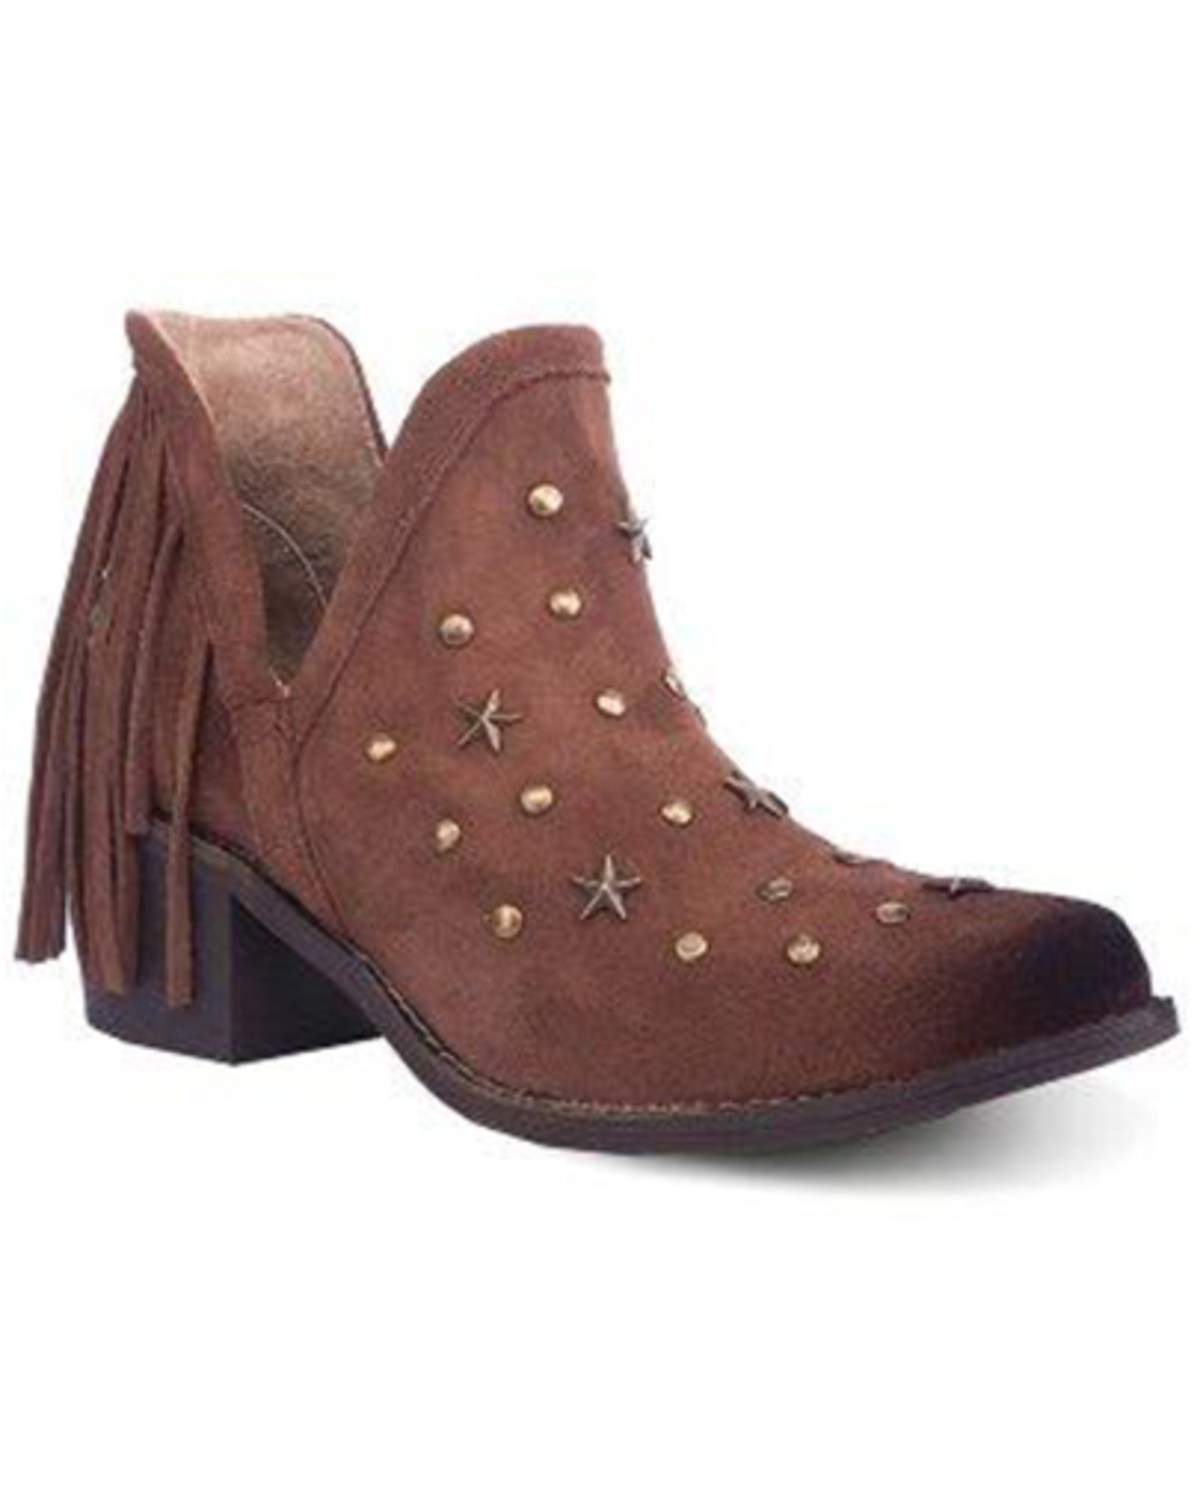 Circle G Women's Fringe Studded Roughout Booties